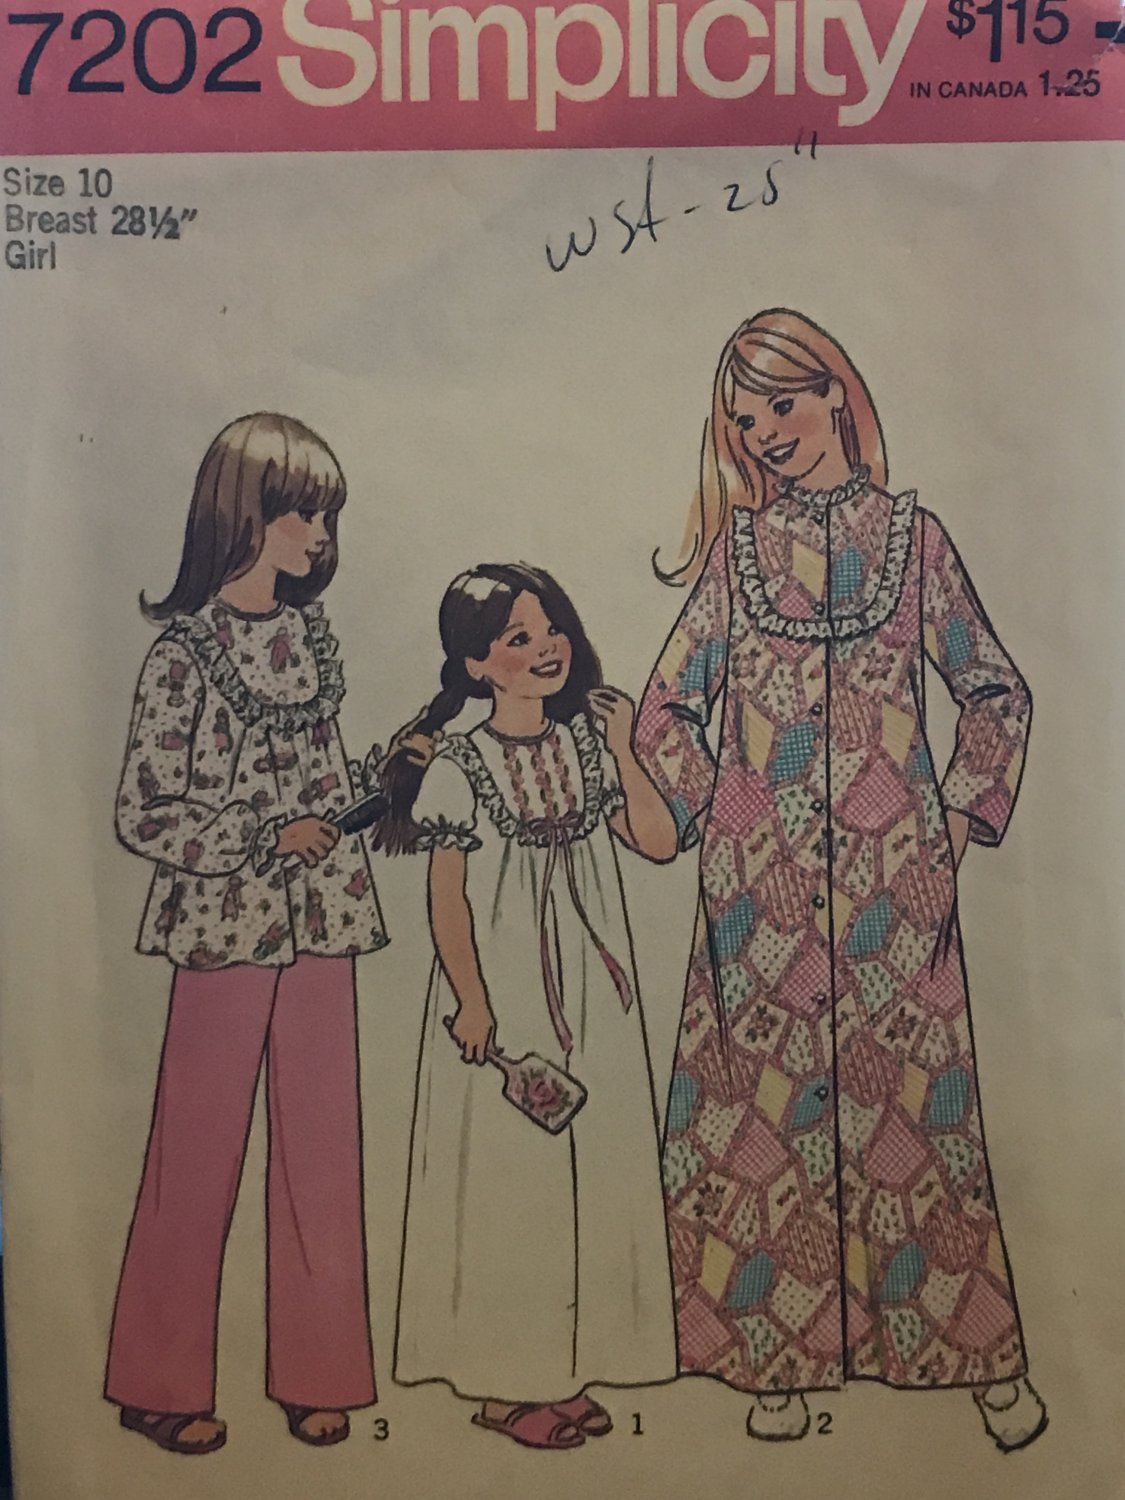 Simplicity 7202 Girl's Robe, Nightgown & Pajamas Sewing Pattern size 10